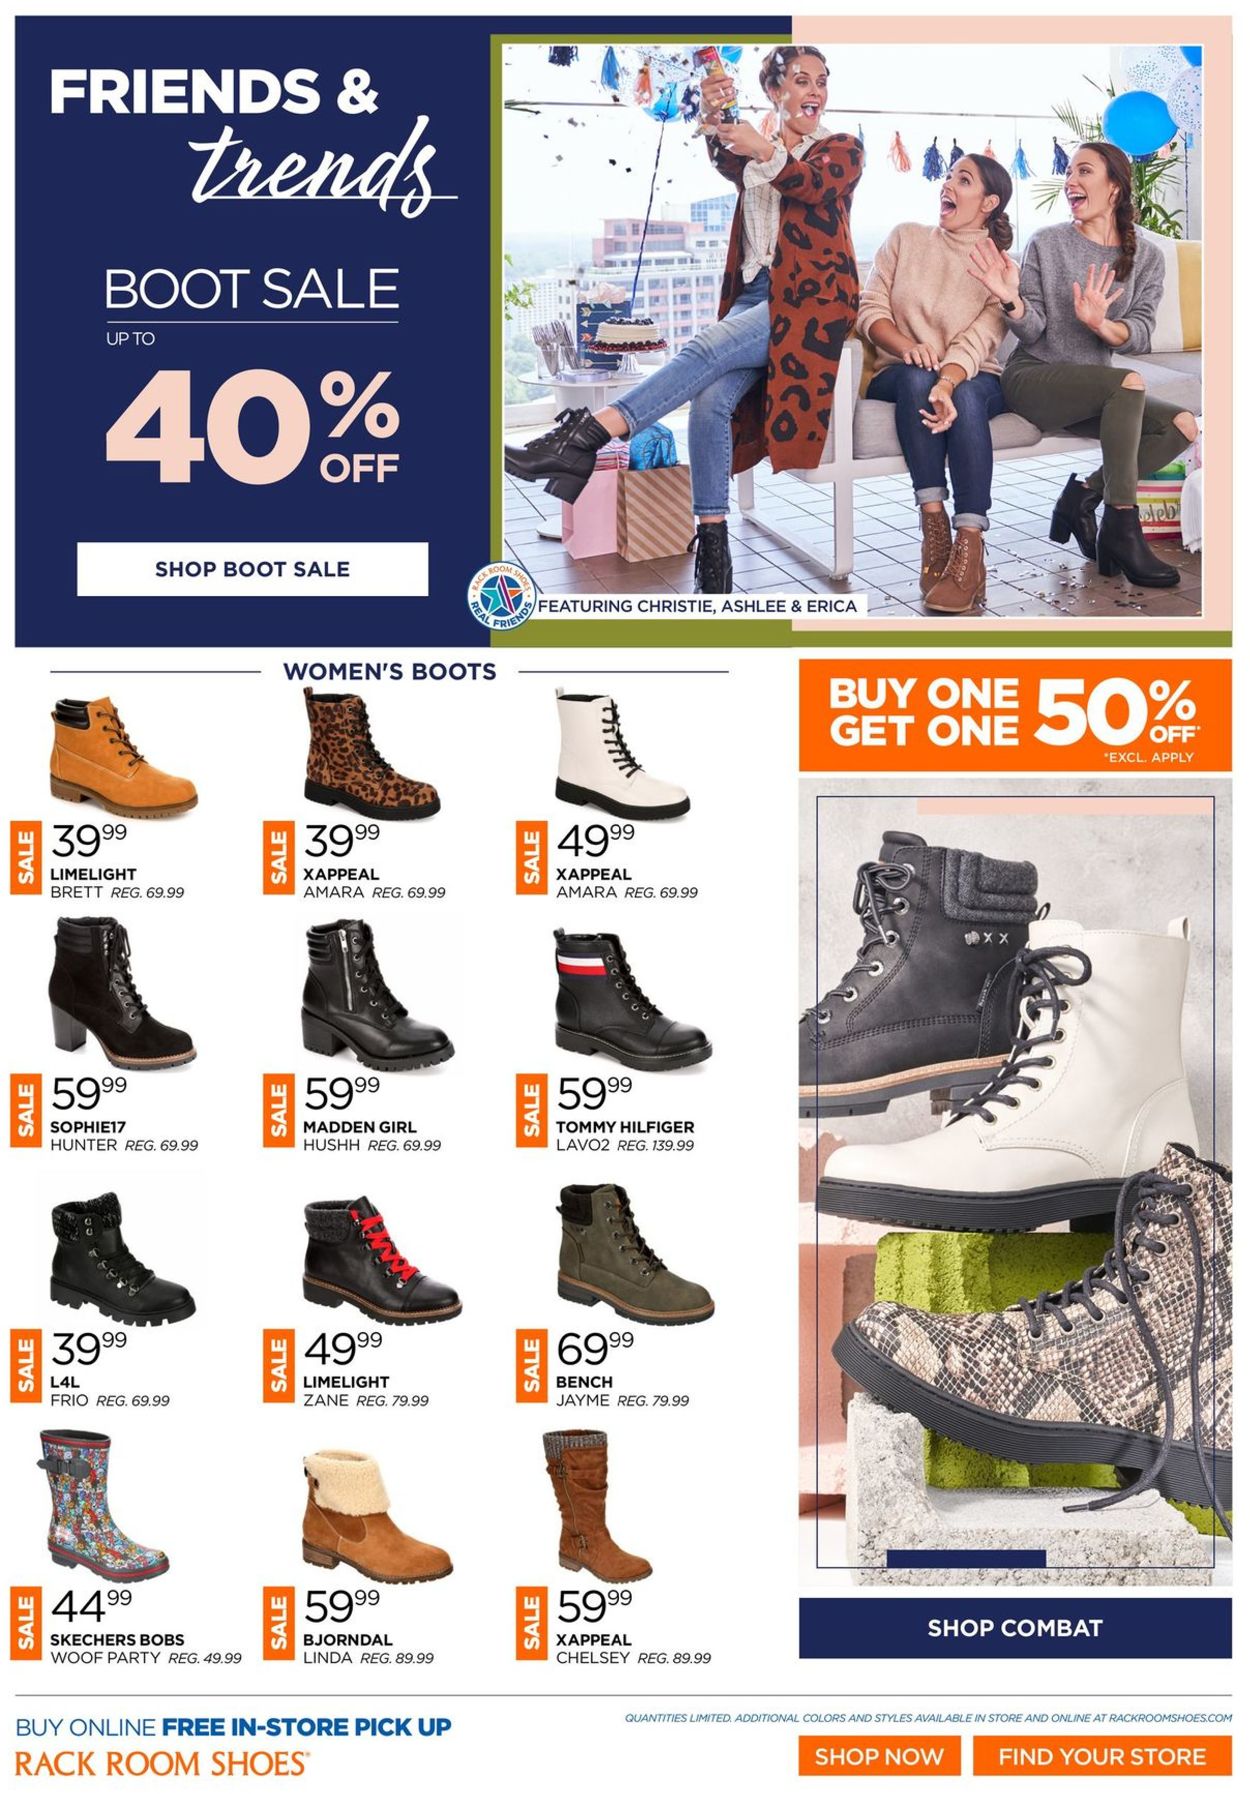 Rack Room Shoes - Black Friday Ad 2019 